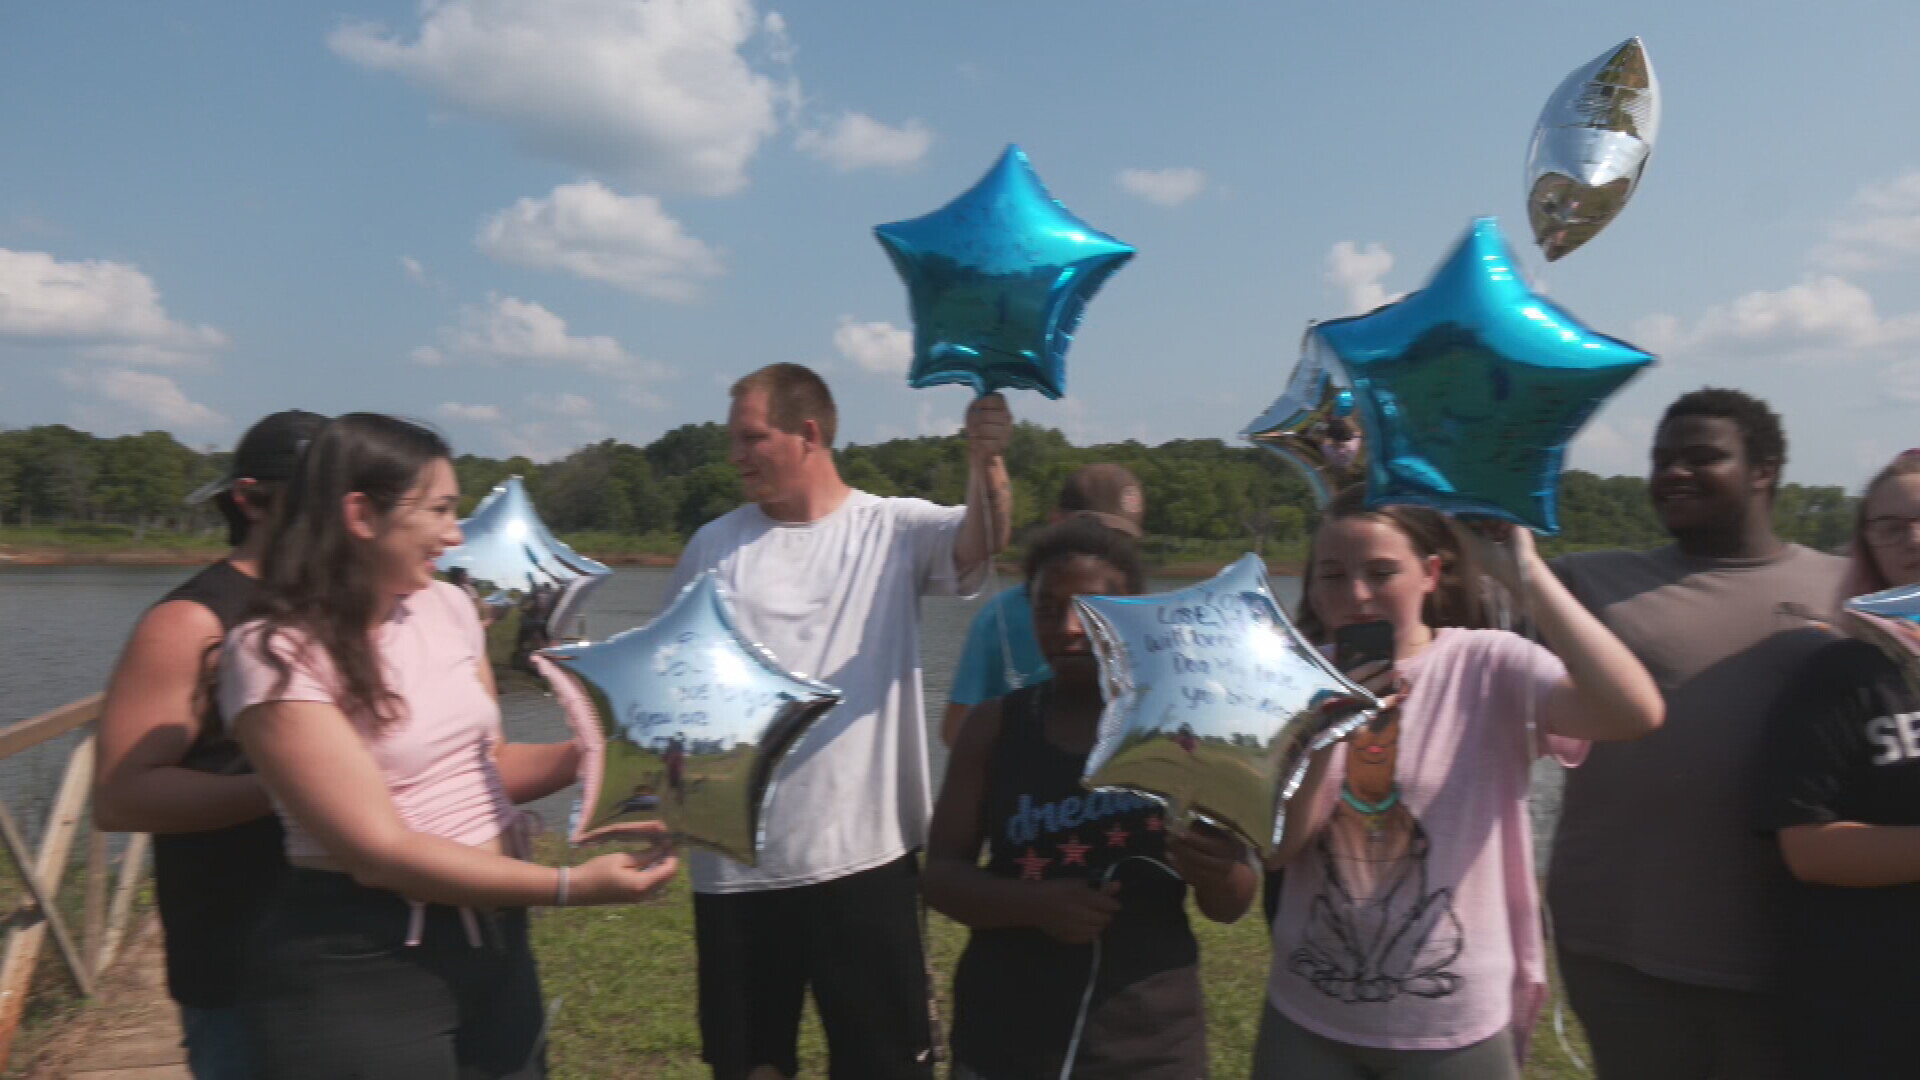 Family Remembers 22-Year-Old With Balloon Release After Drowning At Keystone Lake